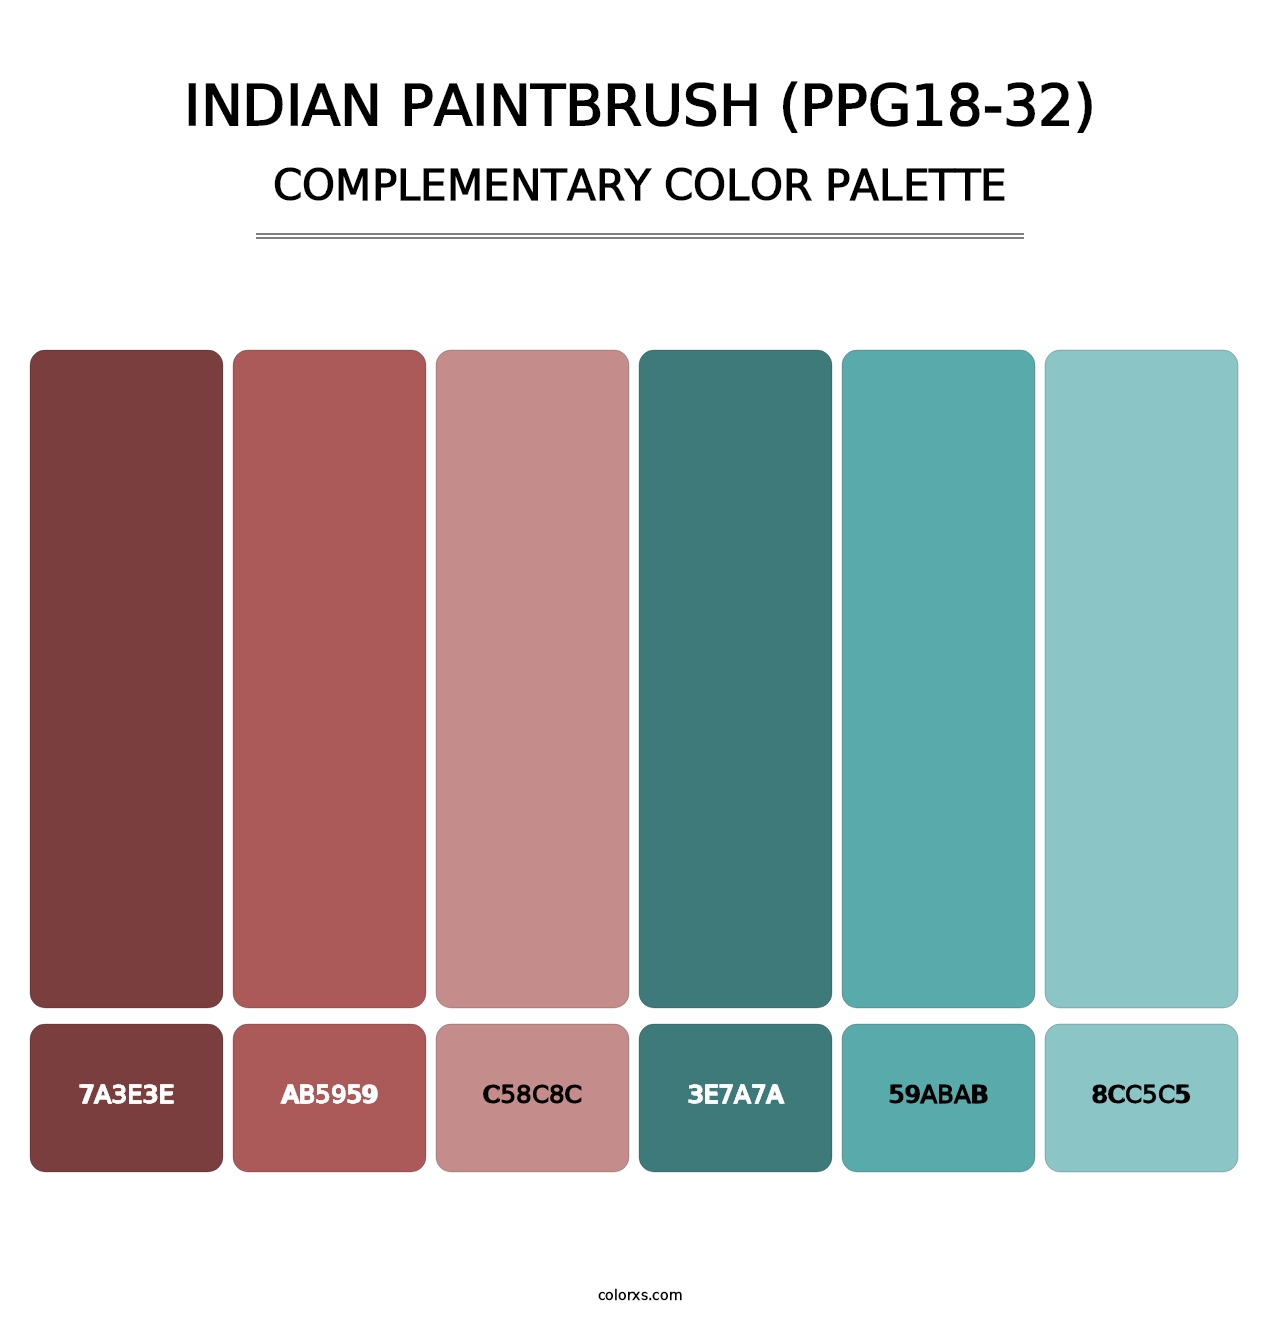 Indian Paintbrush (PPG18-32) - Complementary Color Palette